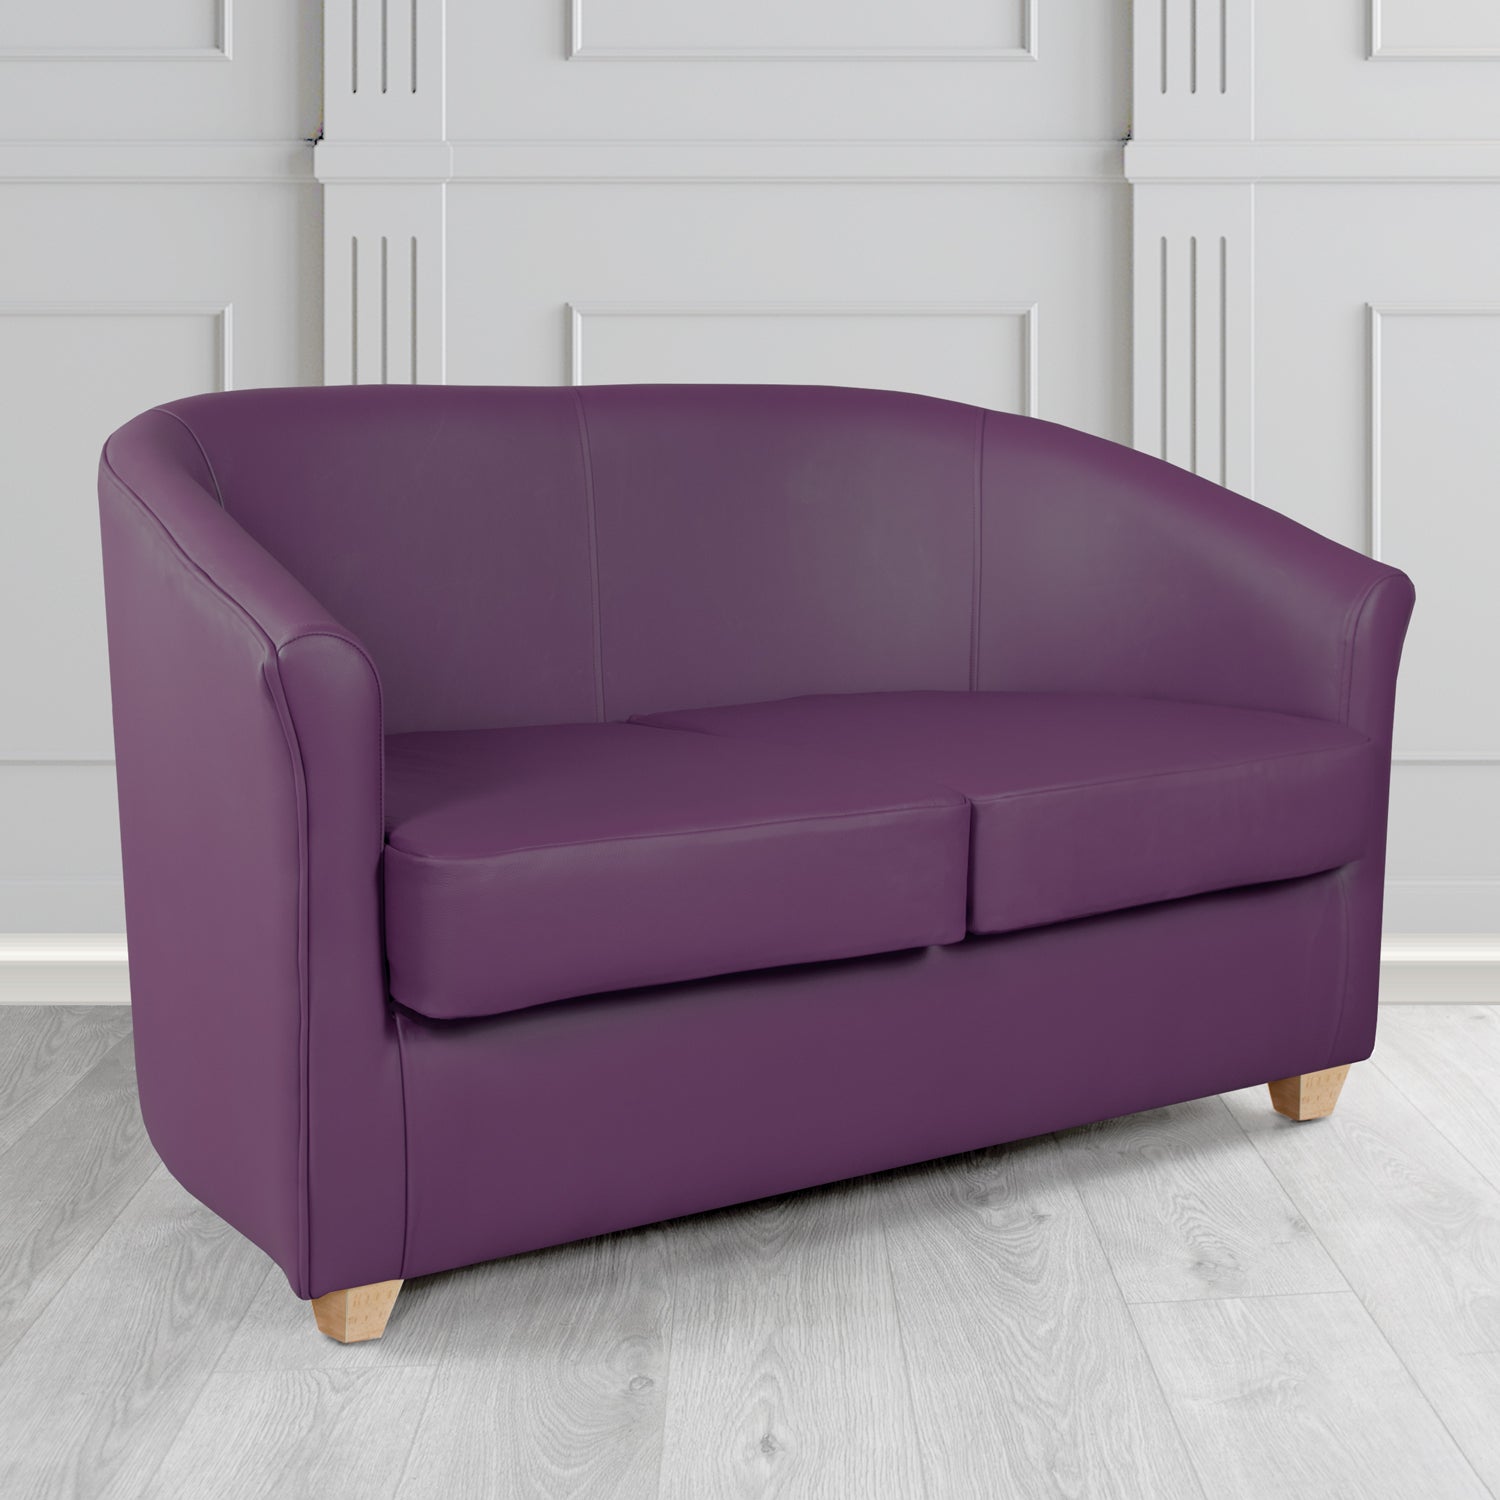 Cannes 2 Seater Tub Sofa in Just Colour Damson Crib 5 Faux Leather - The Tub Chair Shop